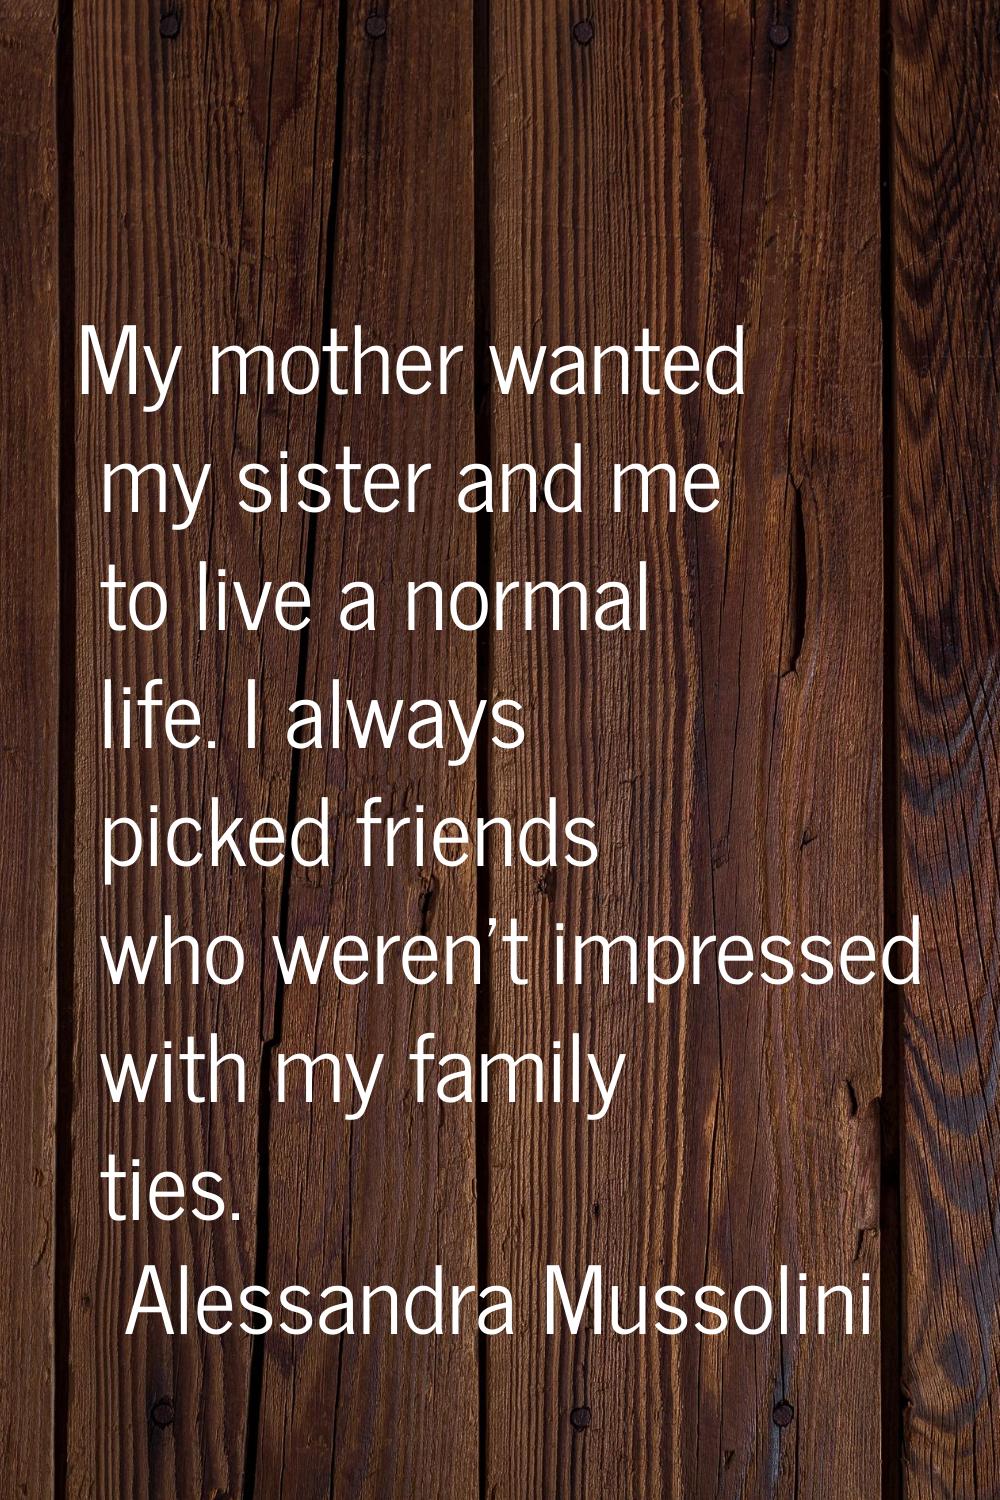 My mother wanted my sister and me to live a normal life. I always picked friends who weren't impres